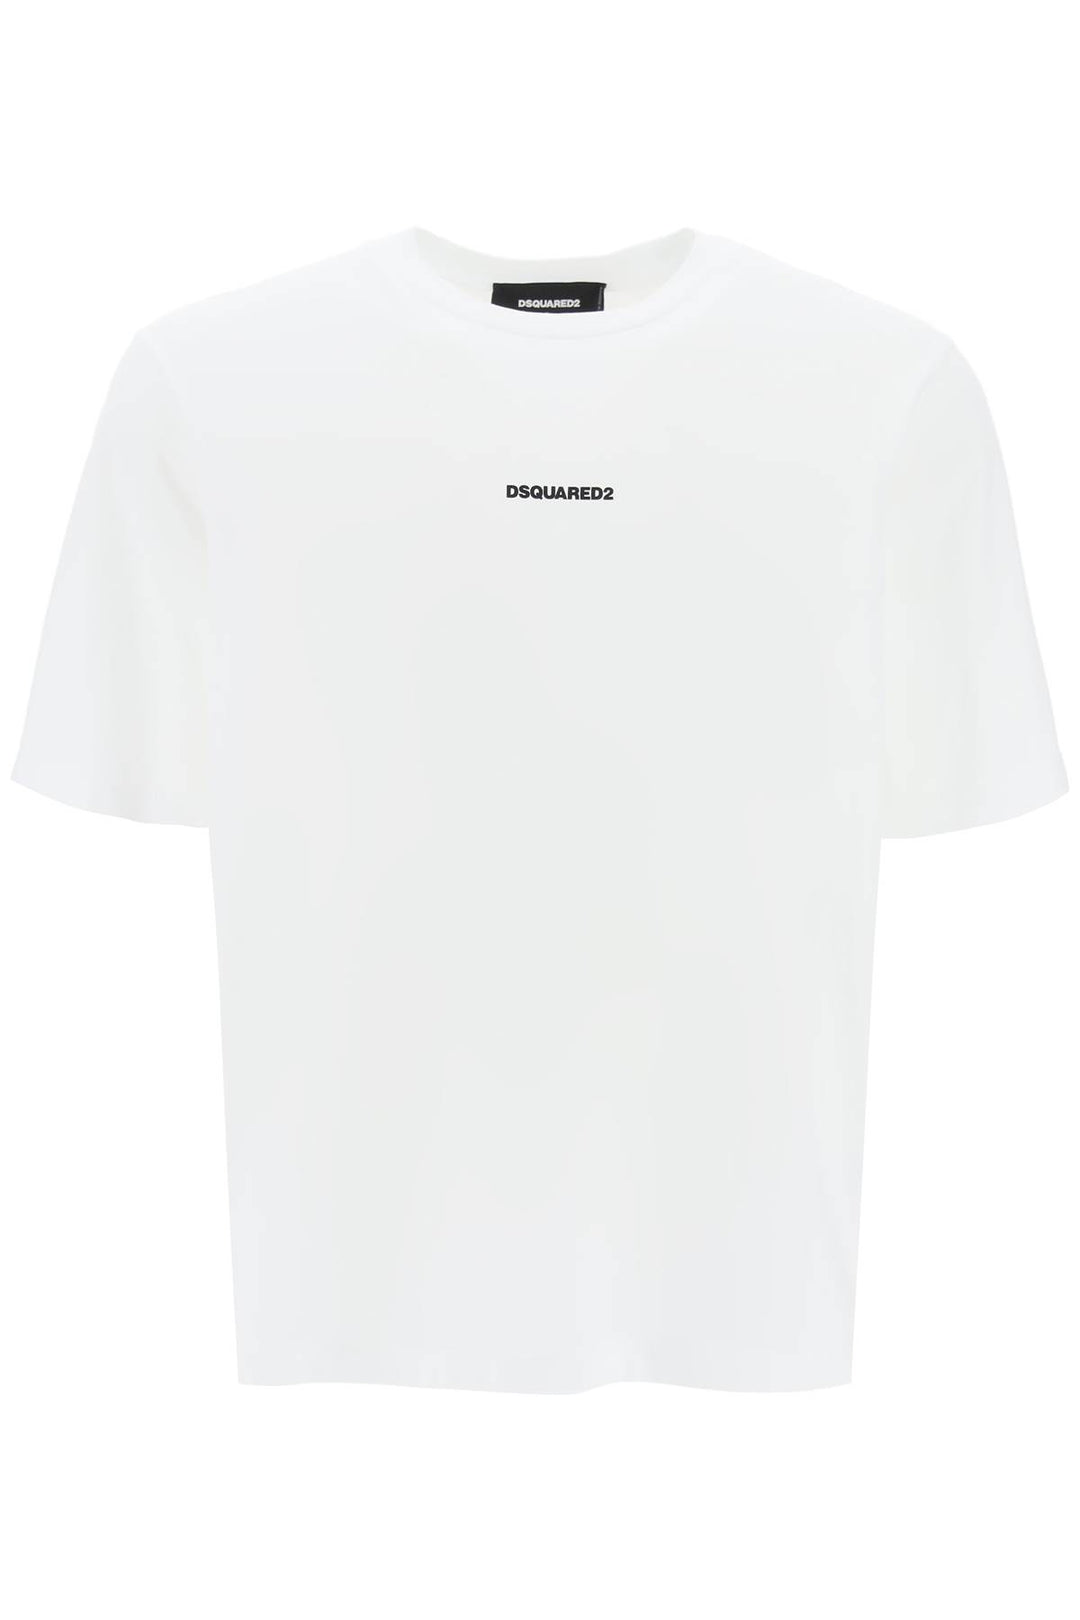 T Shirt Slouch Fit Con Stampa Logo - Dsquared2 - Uomo